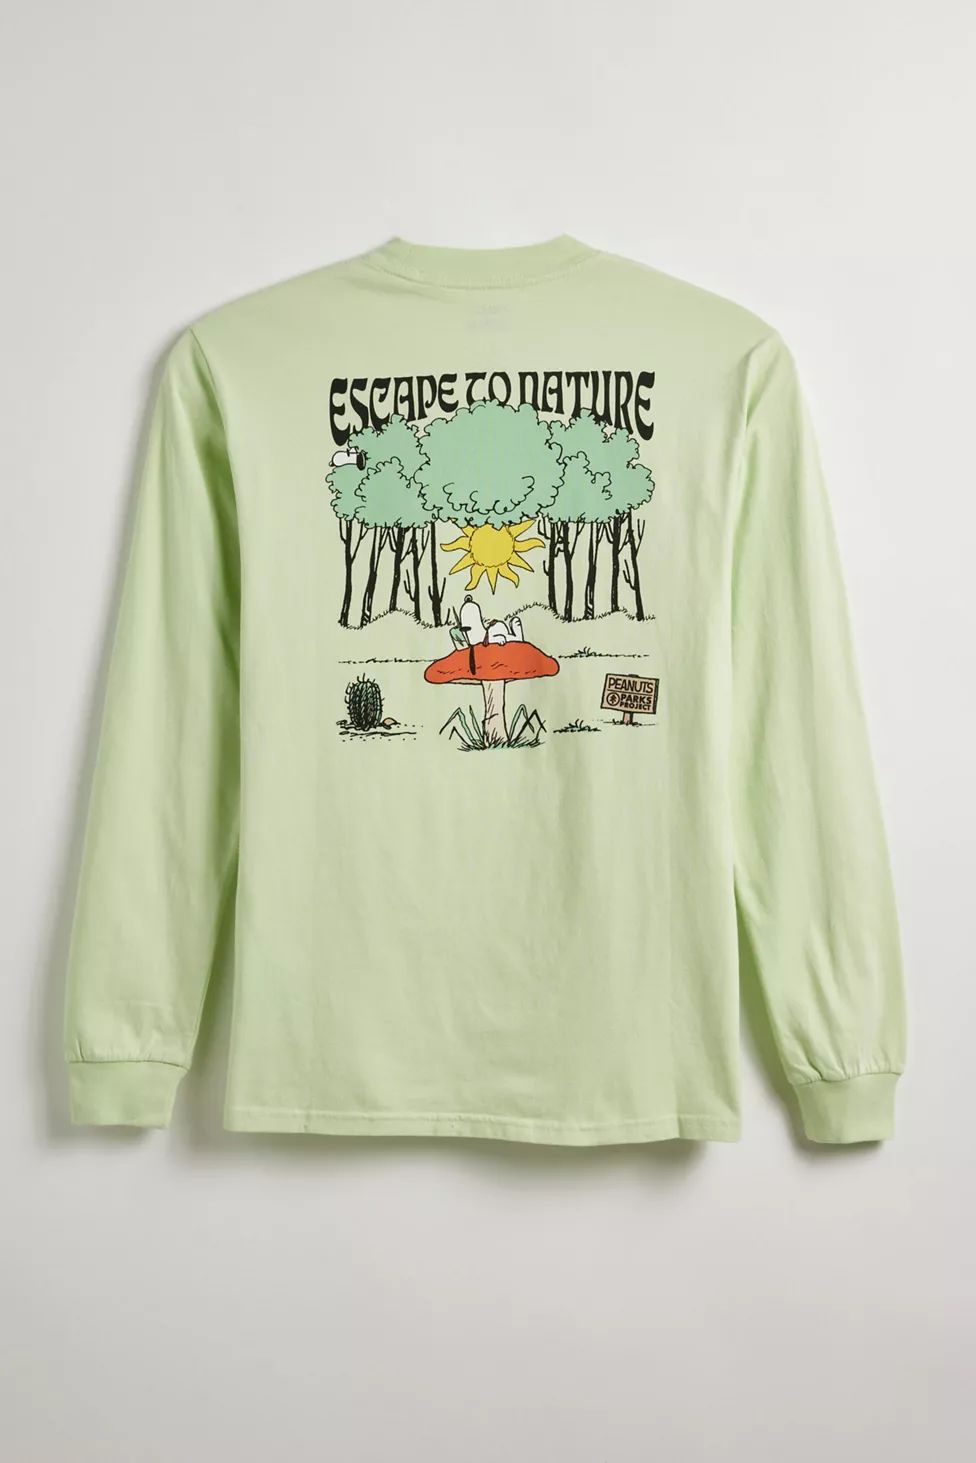 Parks Project X Peanuts UO Exclusive Escape Long Sleeve Tee | Urban Outfitters (US and RoW)